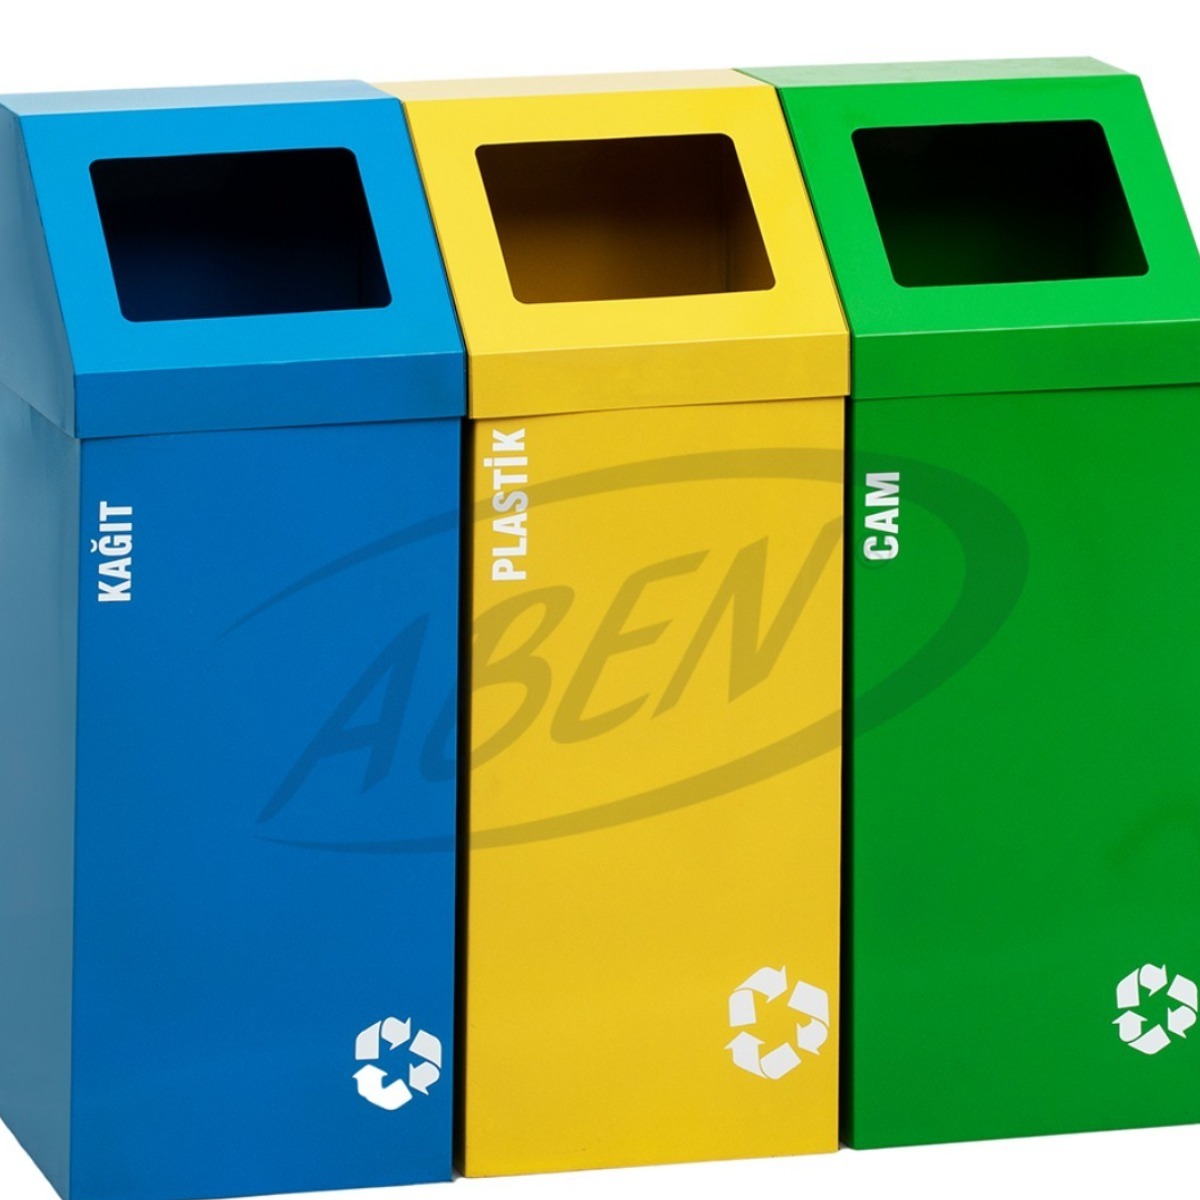 AB-743 3'Part Recycle Bin product logo